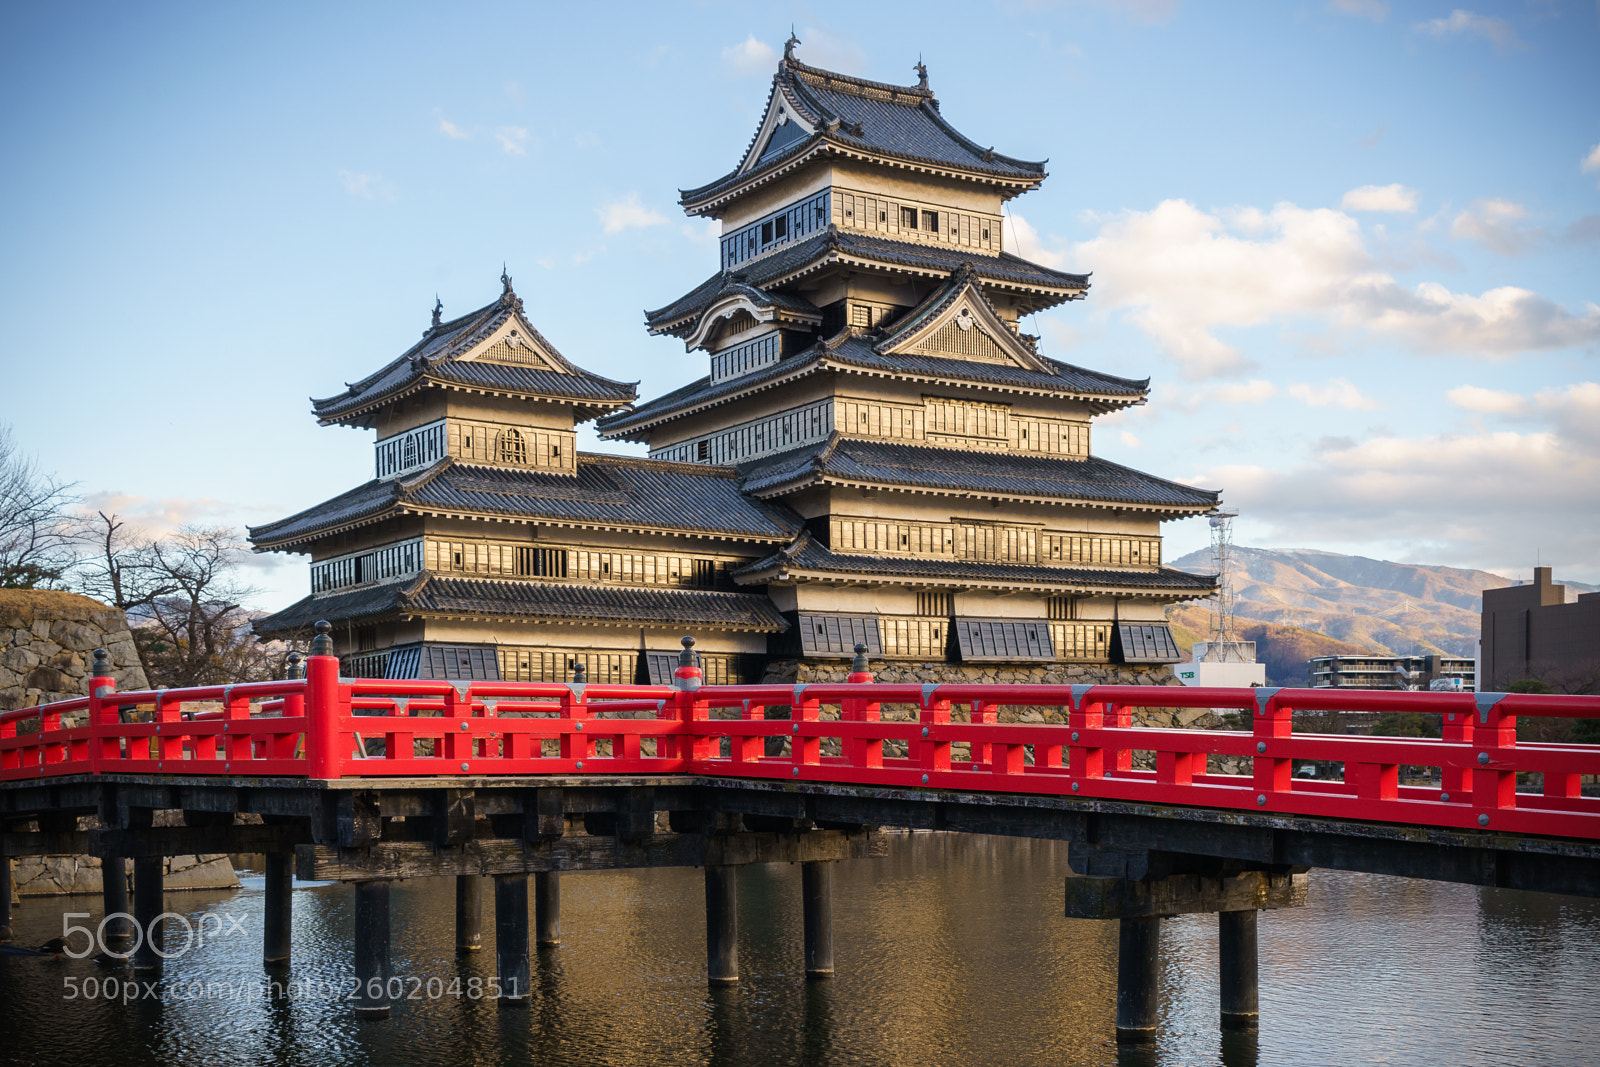 Sony a7 II sample photo. Matsumoto castle bathed by photography